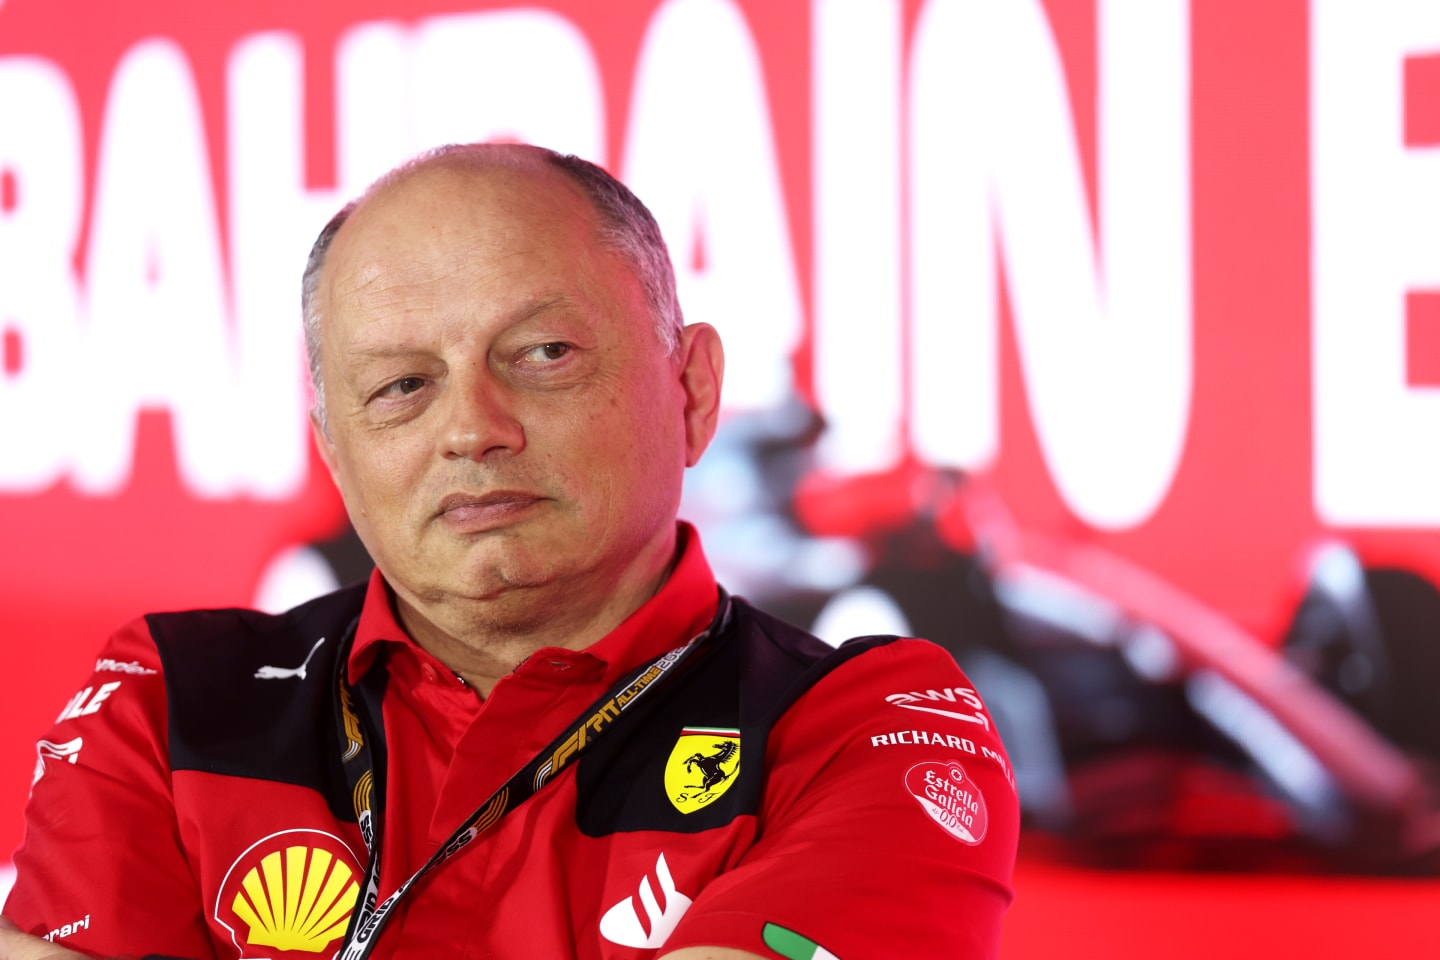 BAHRAIN, BAHRAIN - MARCH 03: Ferrari Team Principal Frederic Vasseur attends the Team Principals Press Conference during practice ahead of the F1 Grand Prix of Bahrain at Bahrain International Circuit on March 03, 2023 in Bahrain, Bahrain. (Photo by Lars Baron/Getty Images)